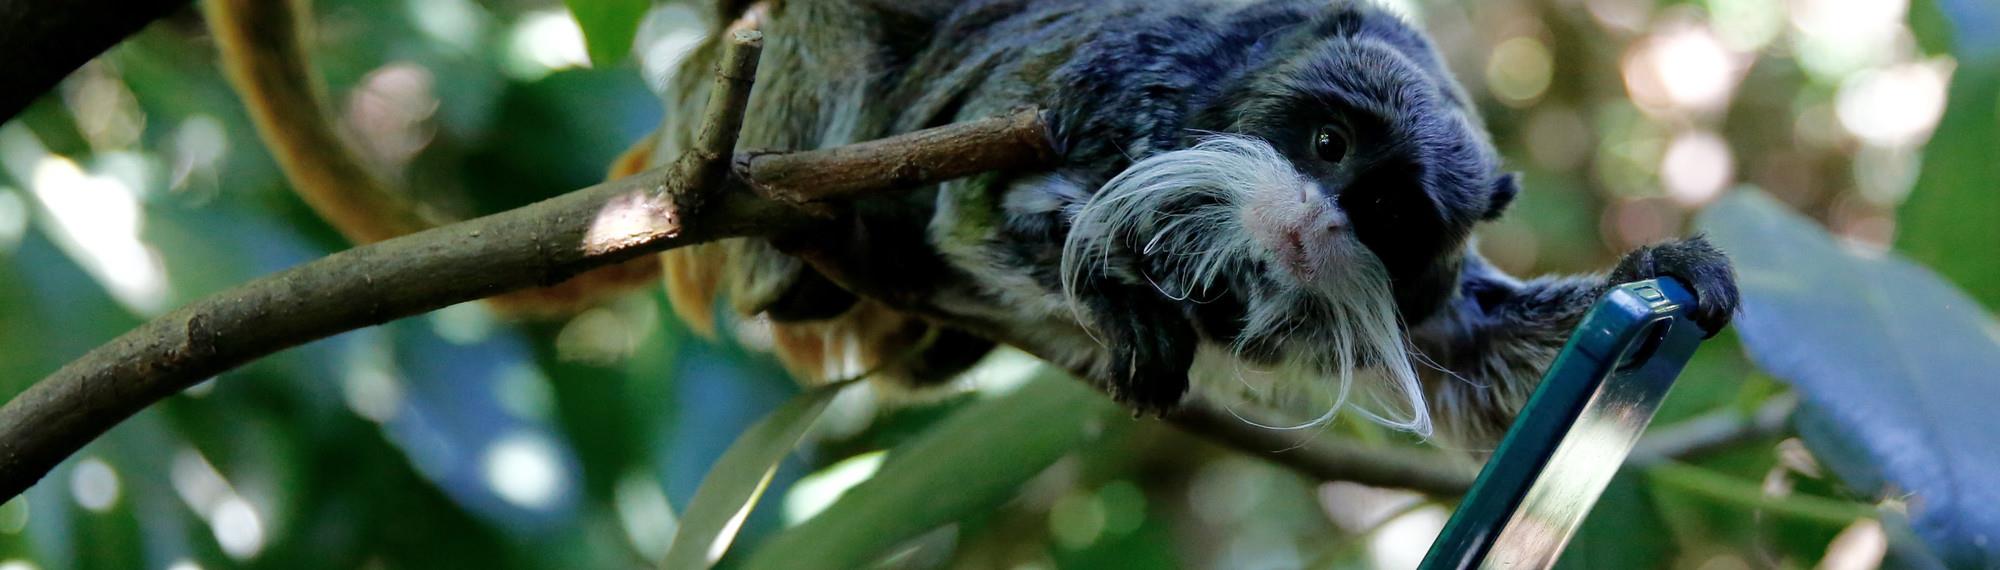 Emperor Tamarin in a branch holding a phone while looking at the camera. He is black with long white whiskers.